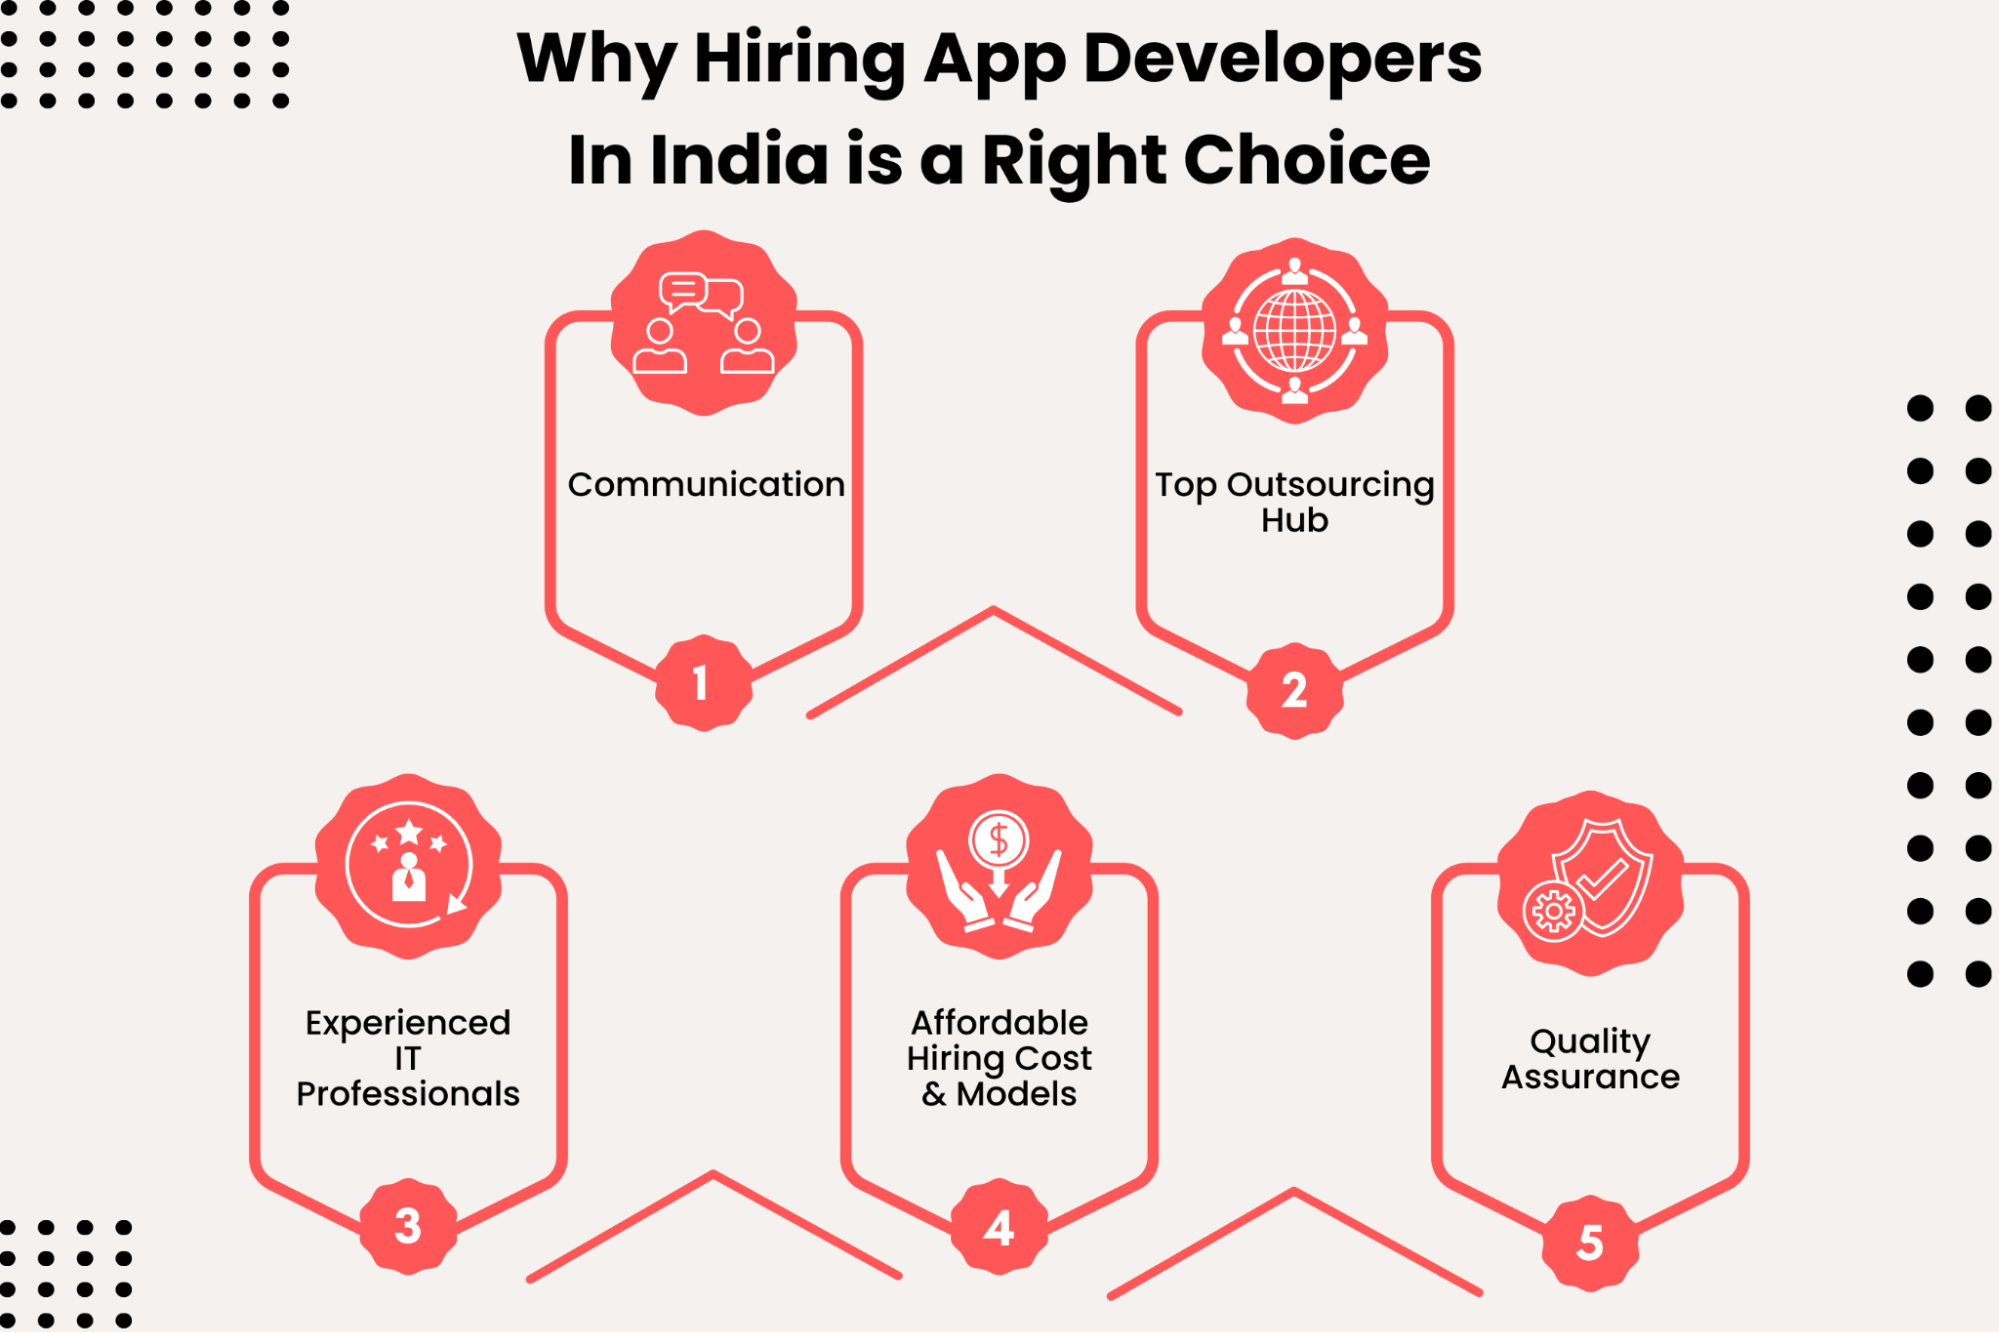 Reasons That Make Hiring App Developers In India A Right Choice